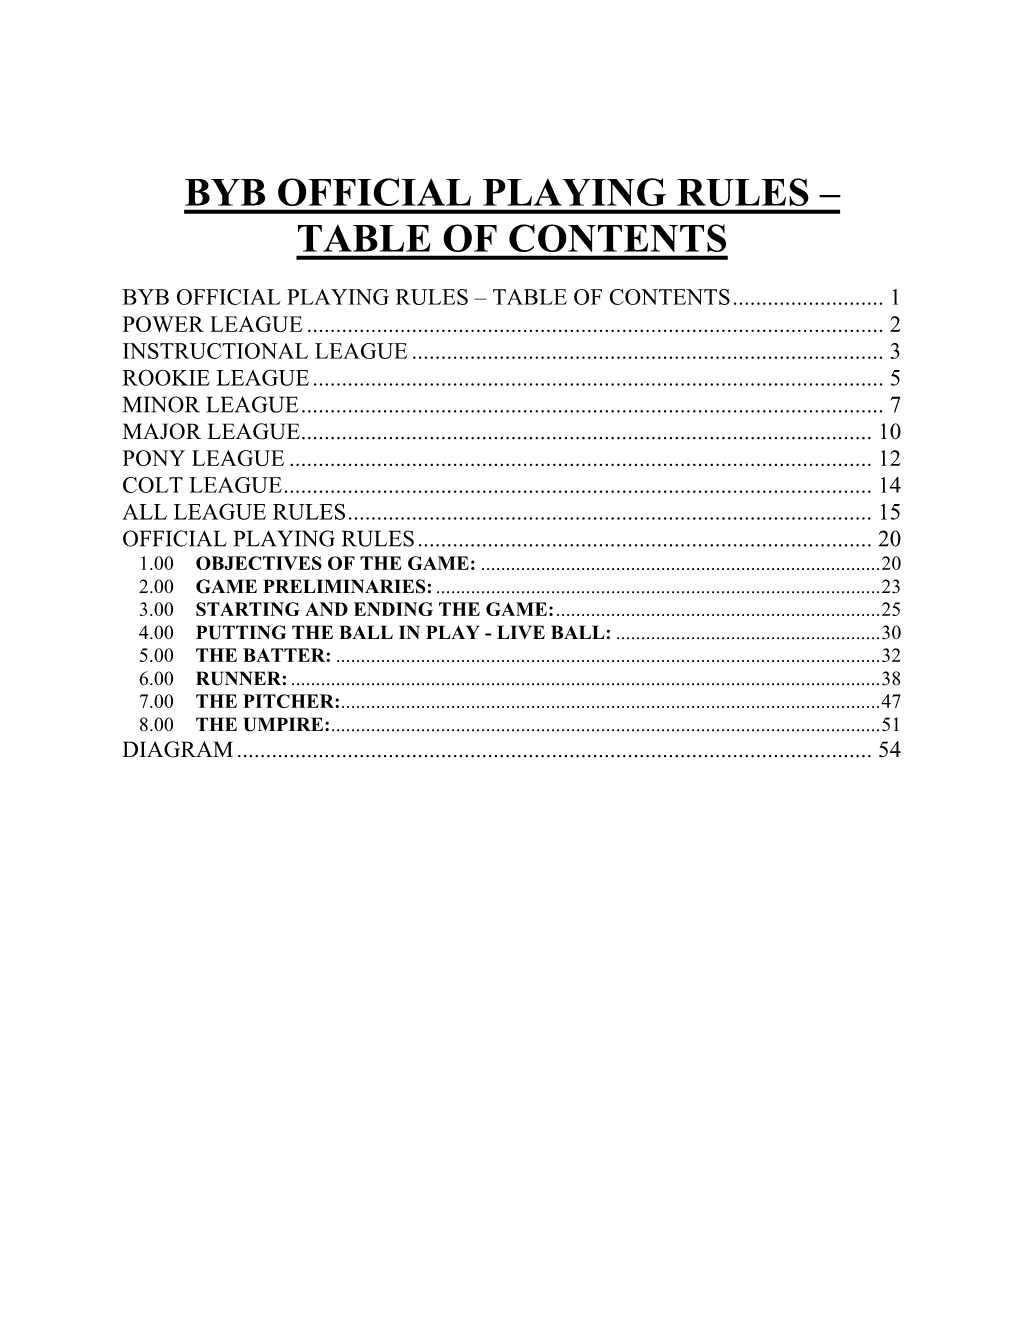 Byb Official Playing Rules – Table of Contents